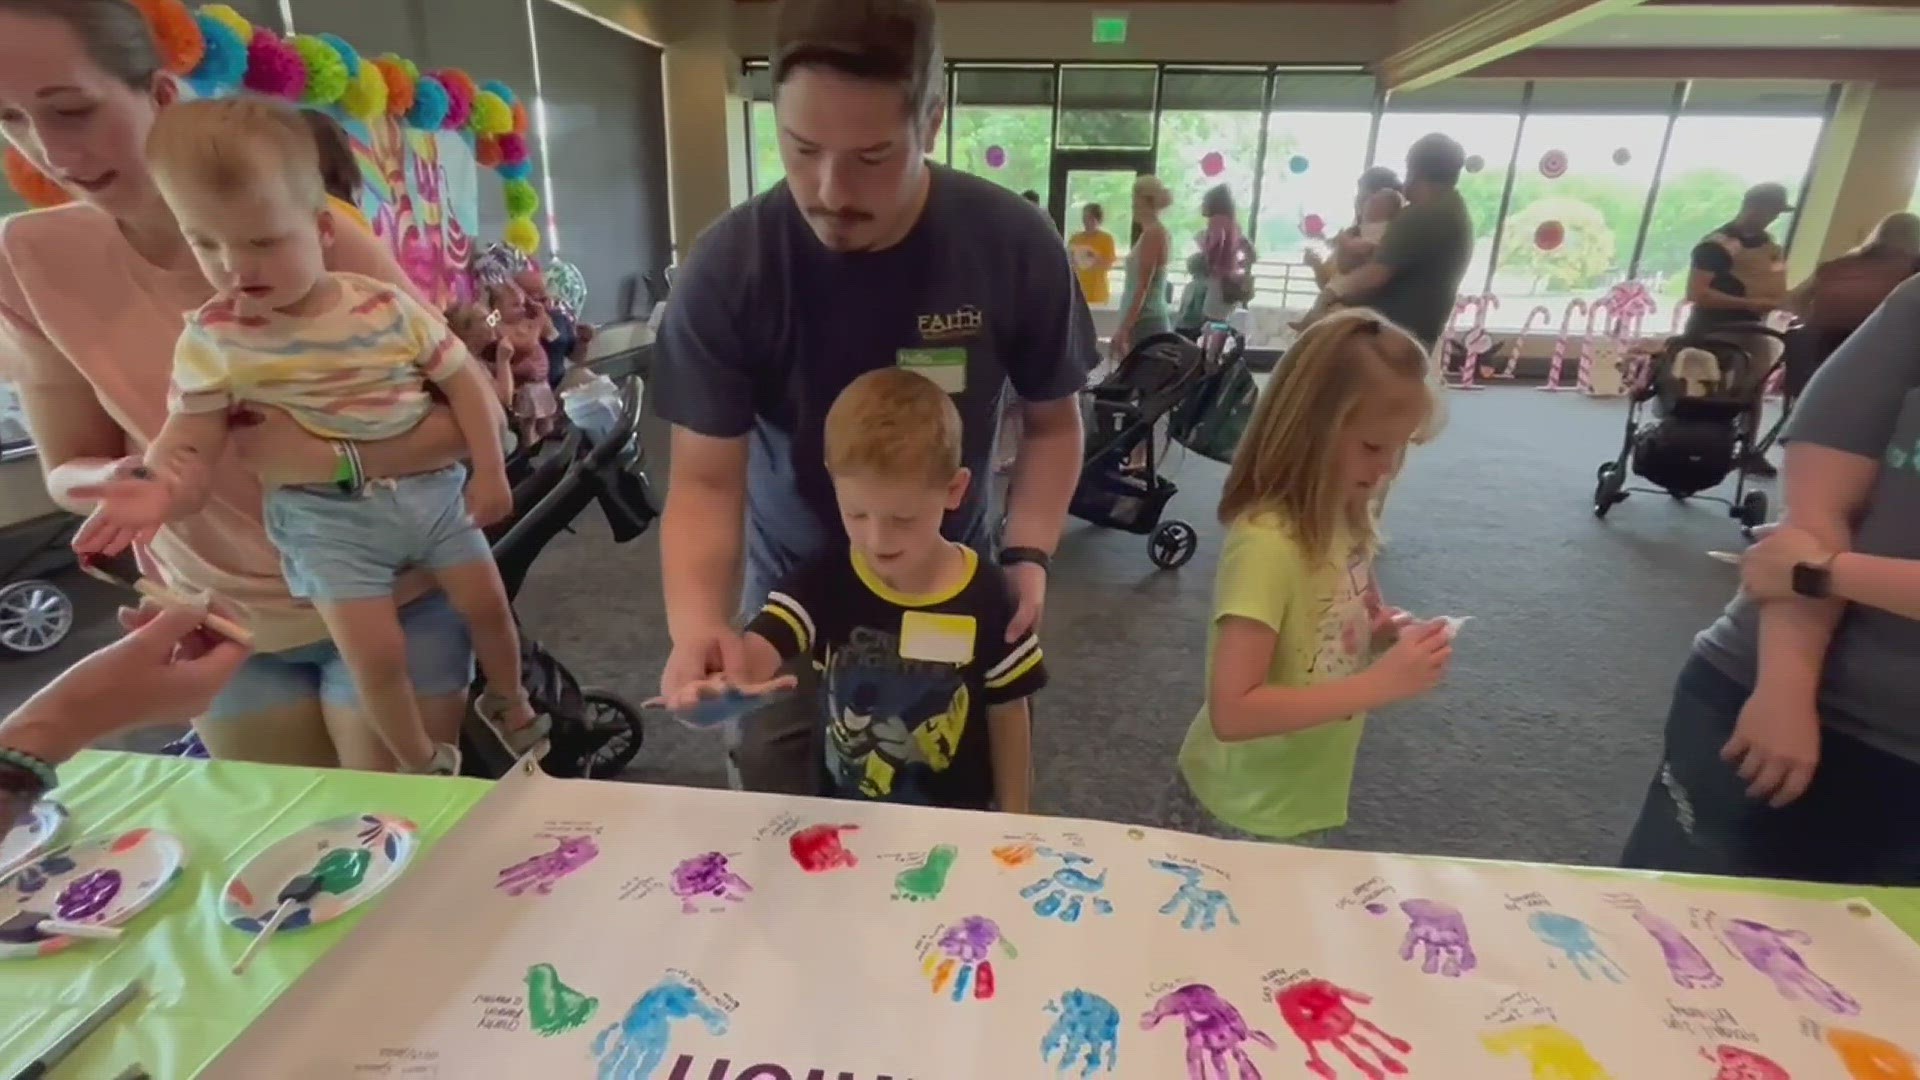 The annual event, held this year at Conner Prairie, is a chance for families and caregivers to reconnect.